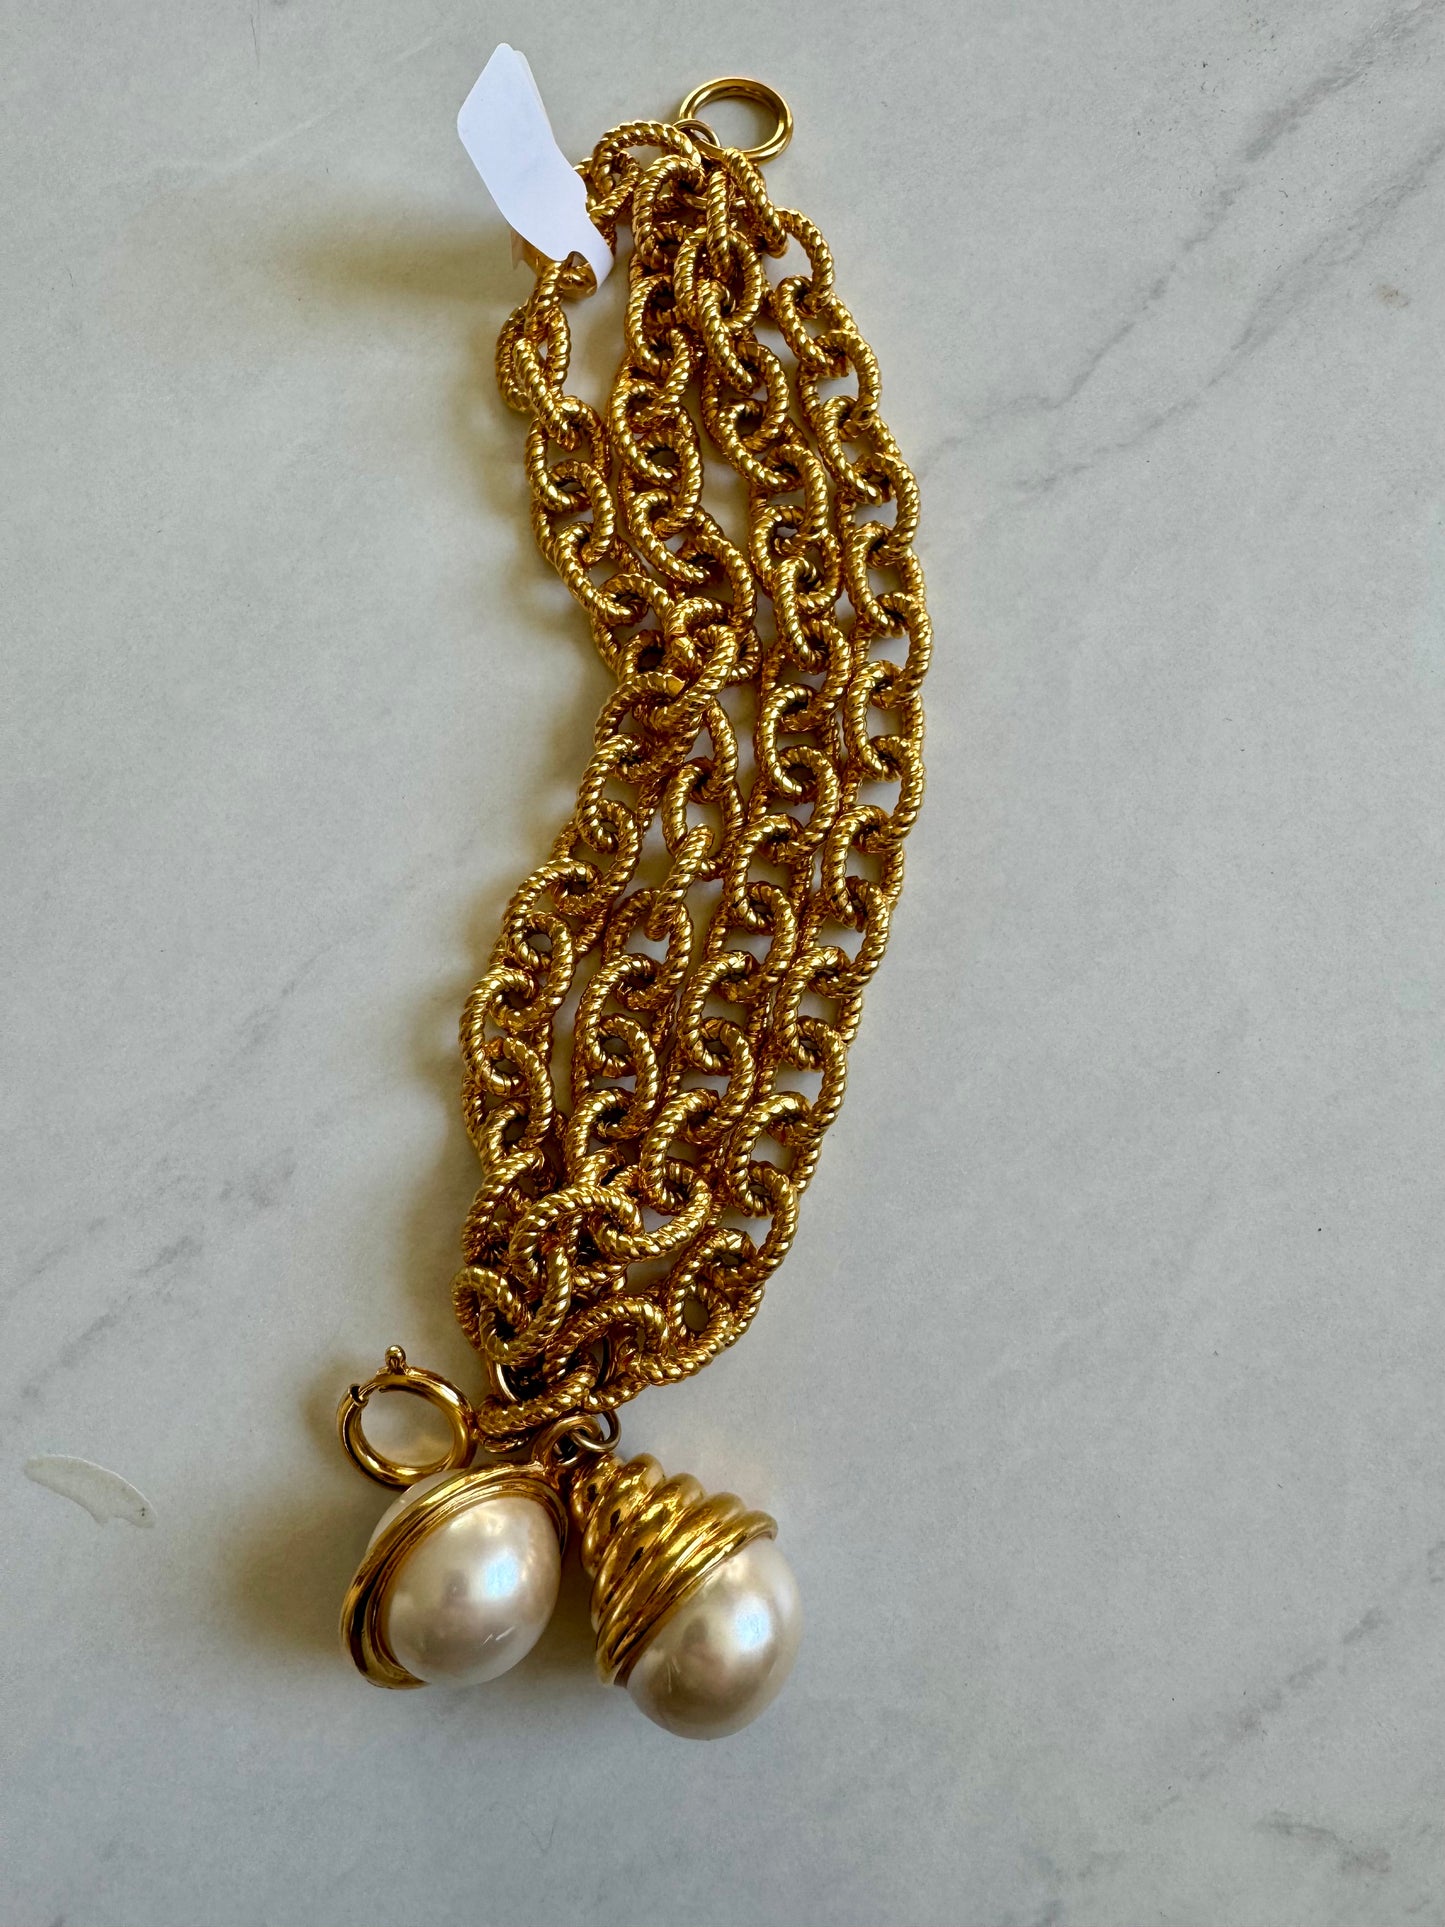 Fabulous 4 strand 1980s gold tone with 2 pearl charm